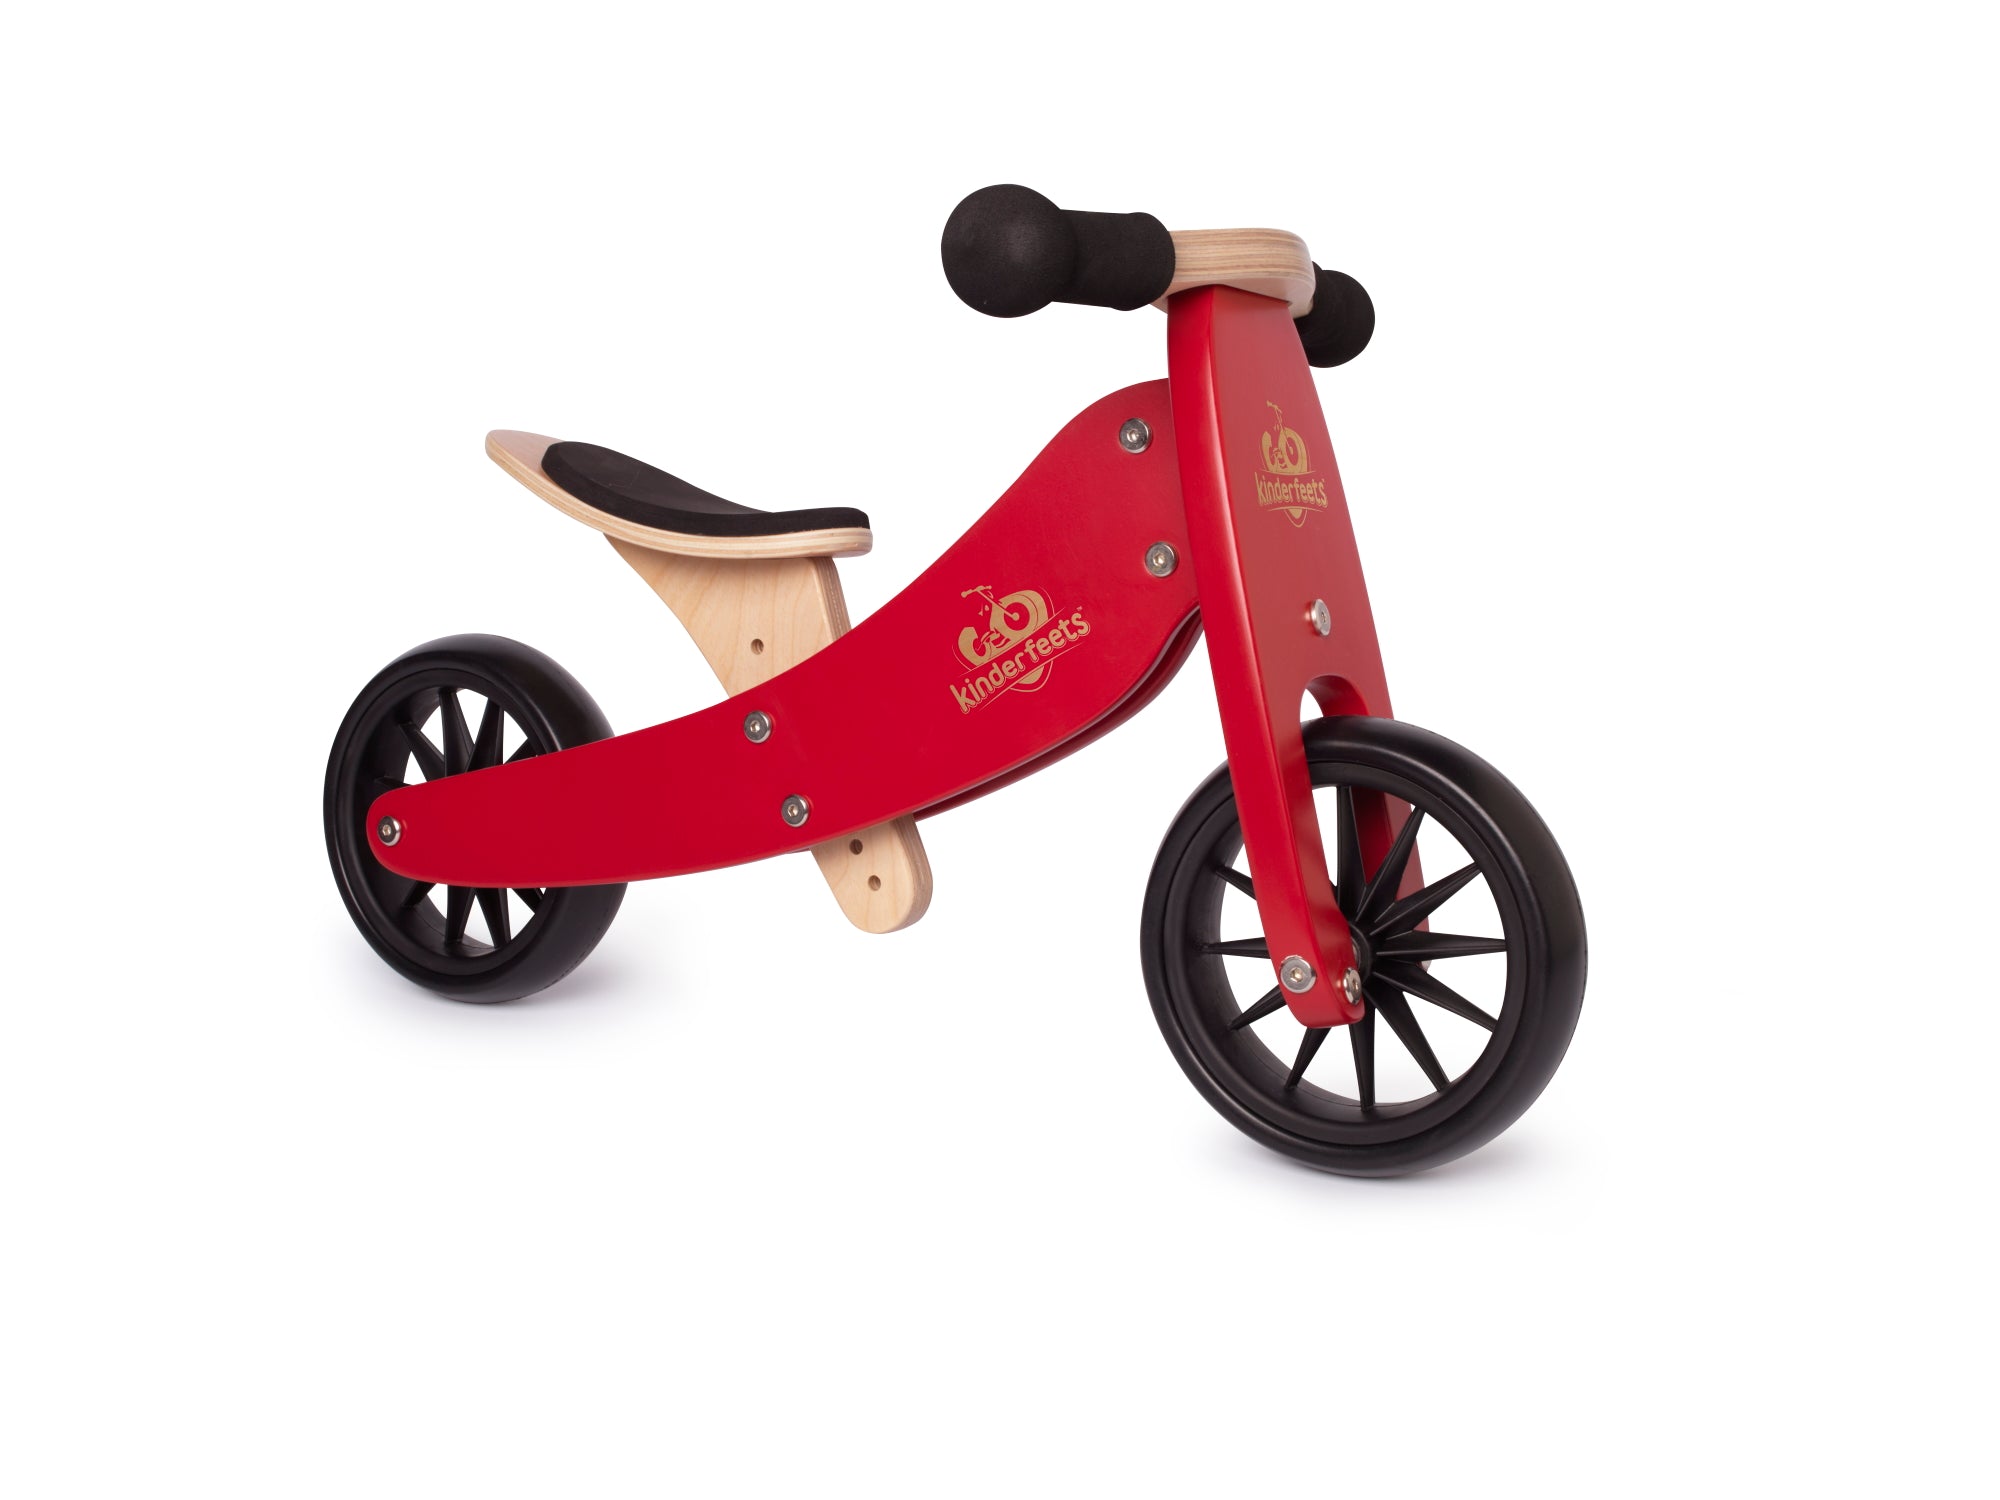 Kinderfeets TINY TOT Trike converts to a 2 wheeled Balance Bike 2-in-1 (Cherry Red) for toddlers and young children training on a no pedals running bike / tricycle